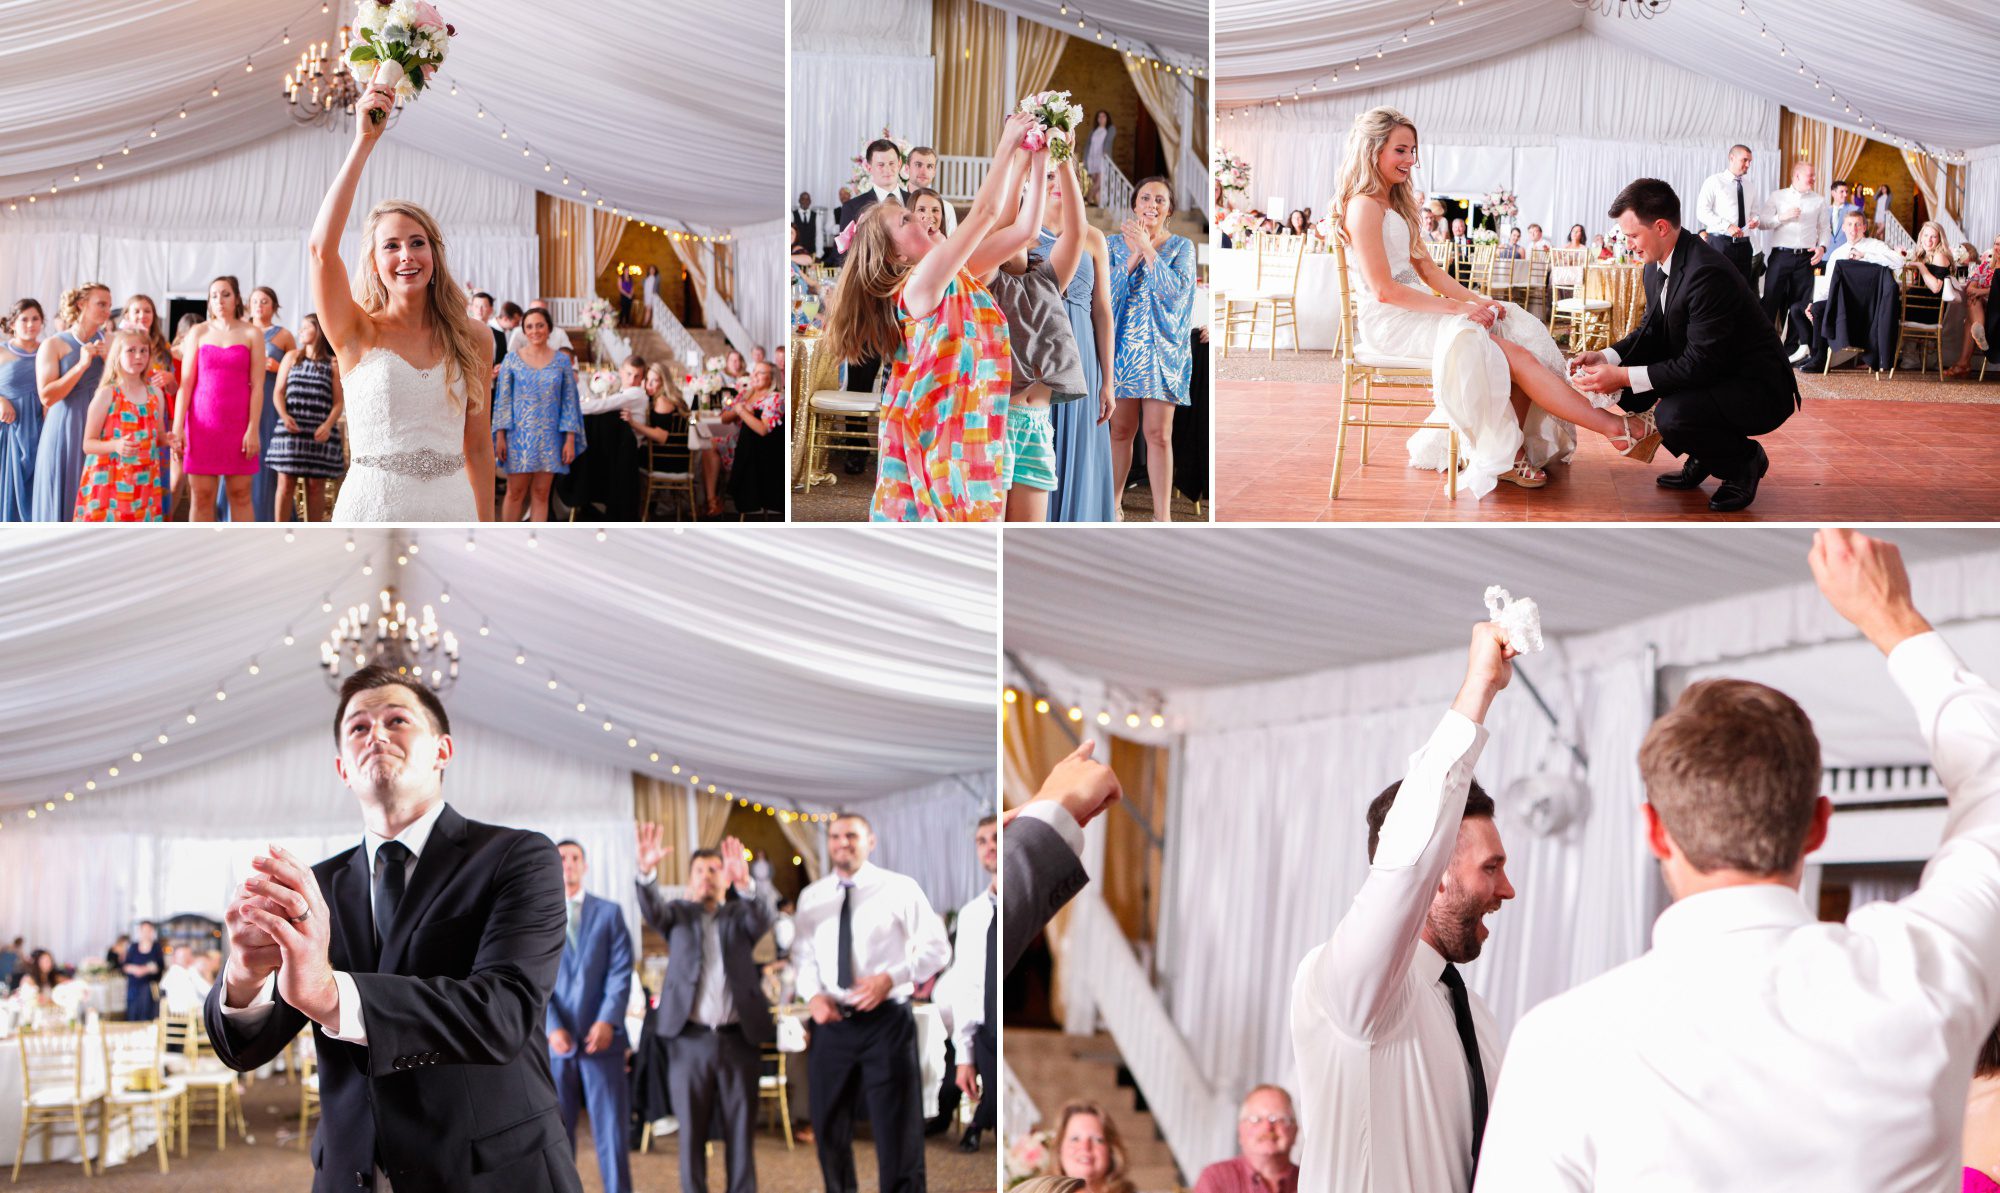 Bouquet and garter toss at wedding reception Riverwood Mansion in Nashville, Tennessee. Photography by Krista Lee.